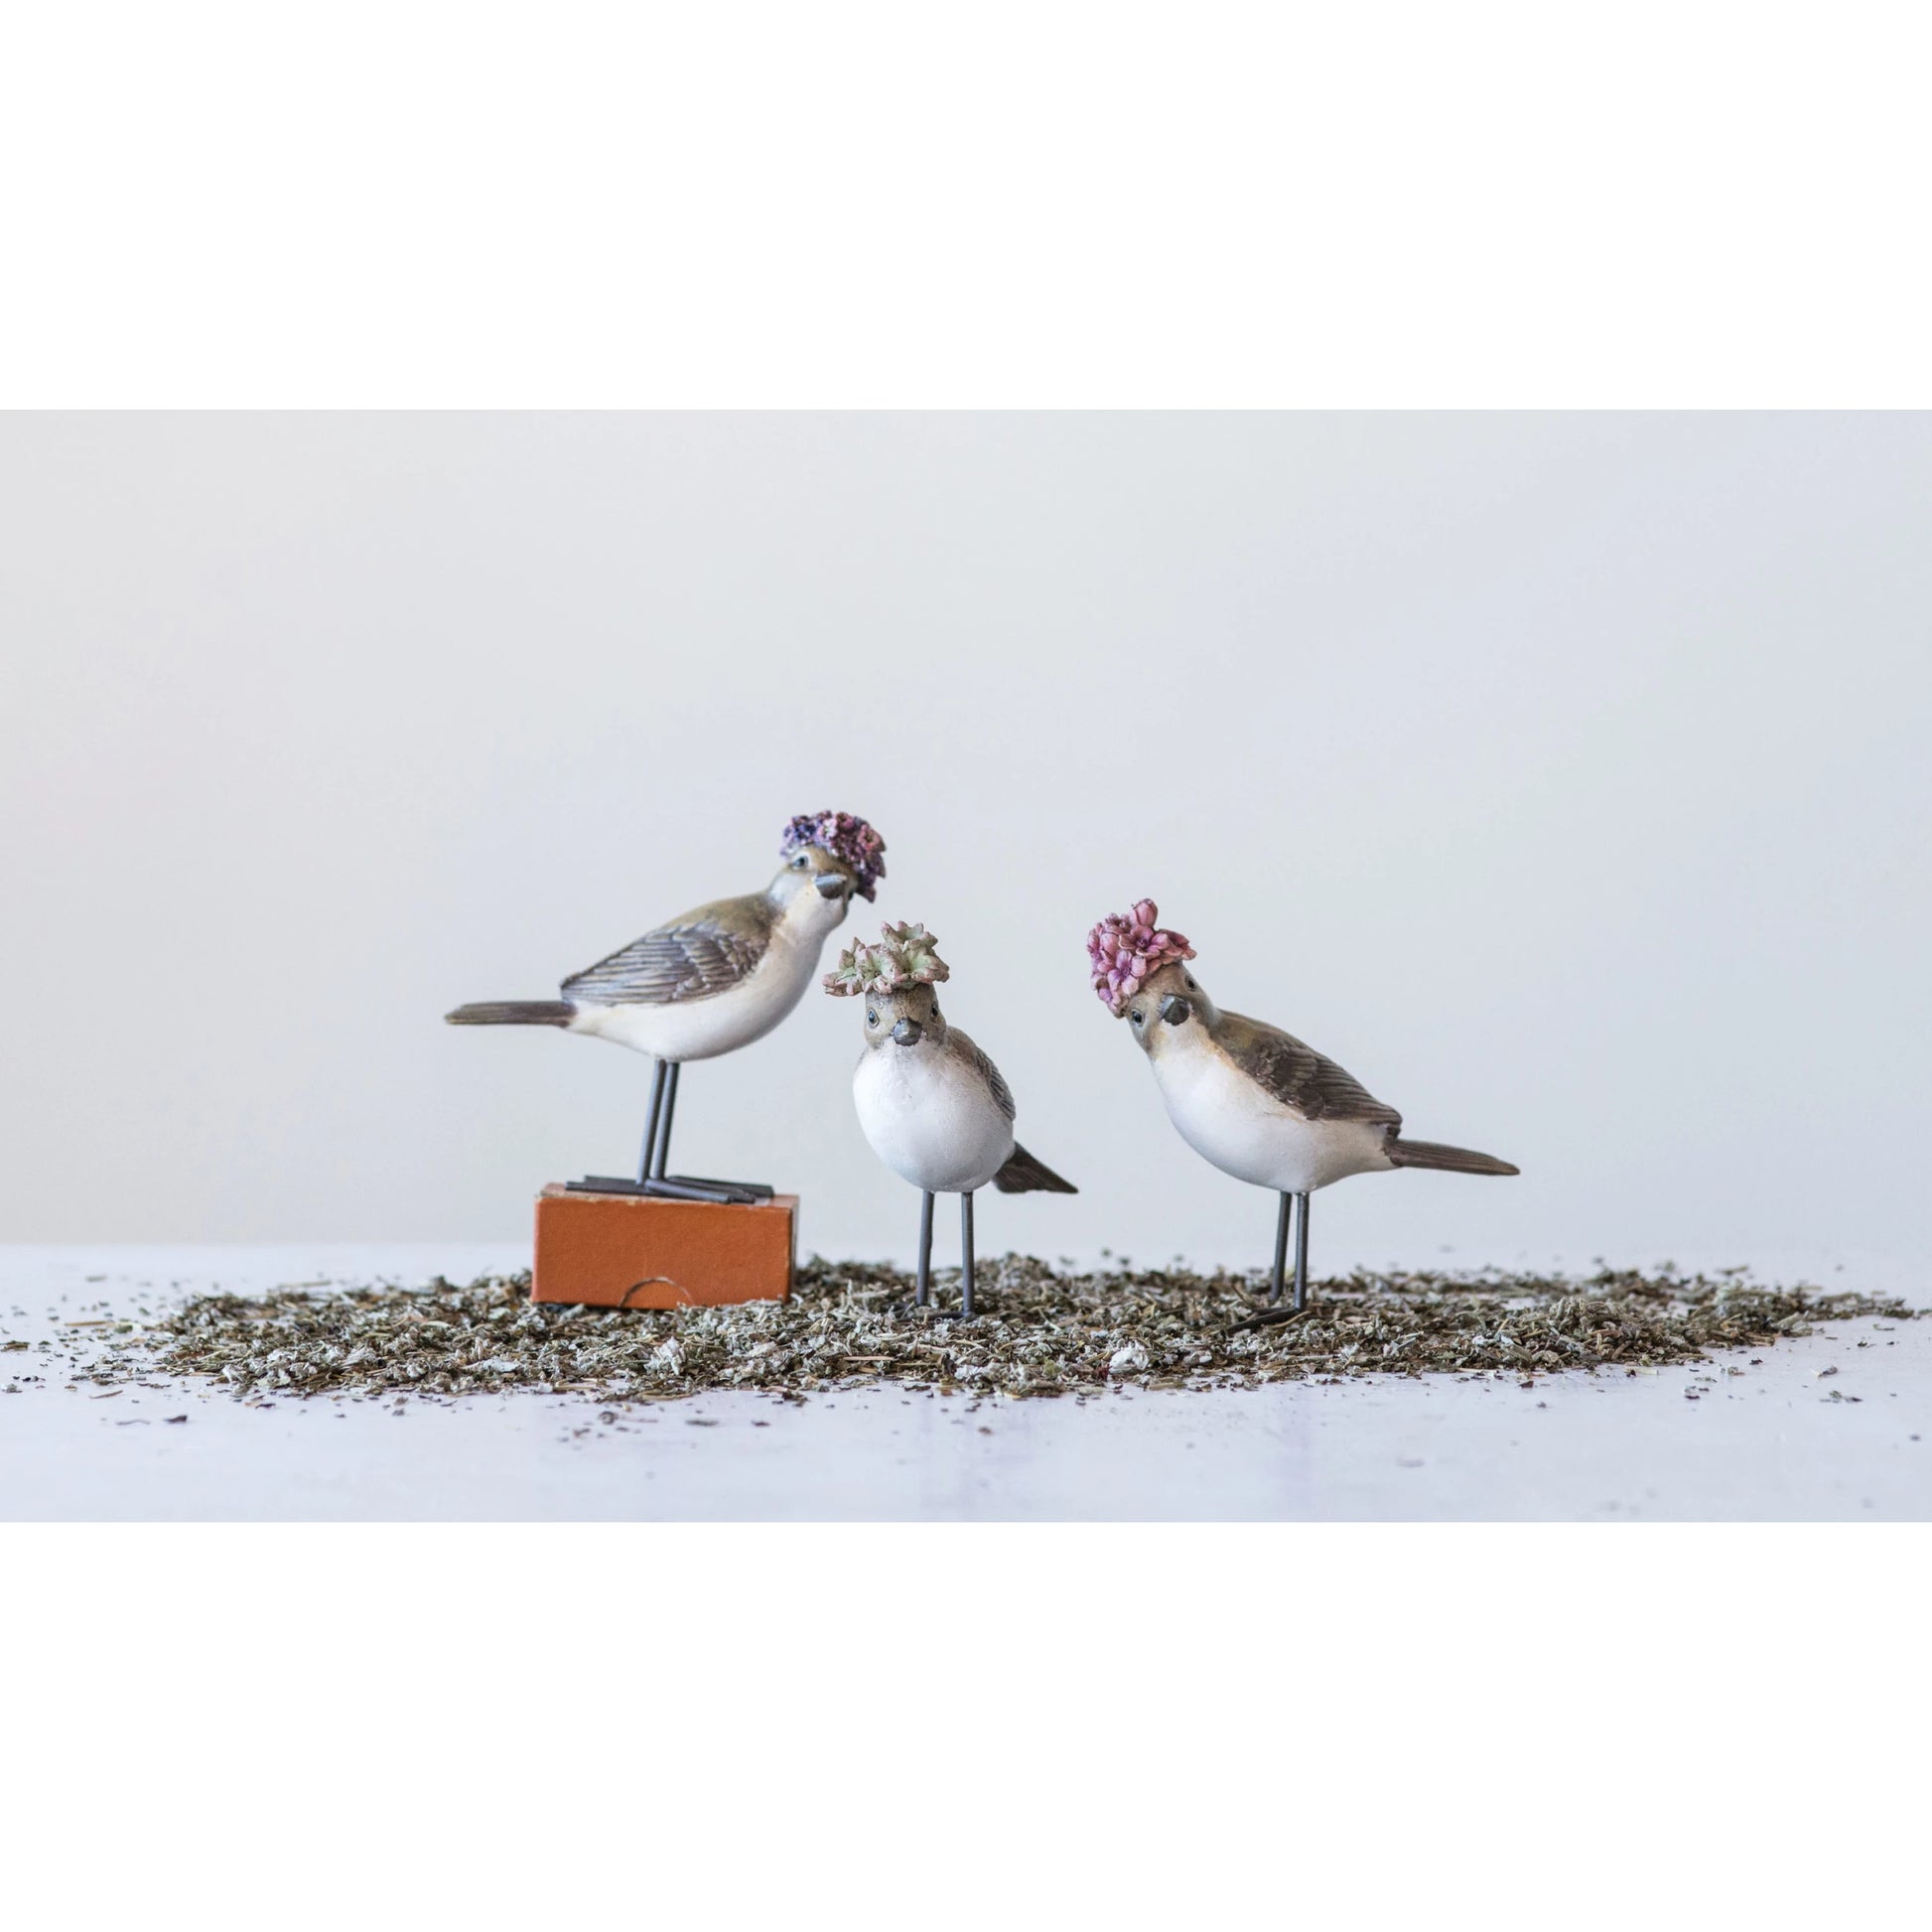 3 styles of birds with hat arranged in a pile of dried seeds.